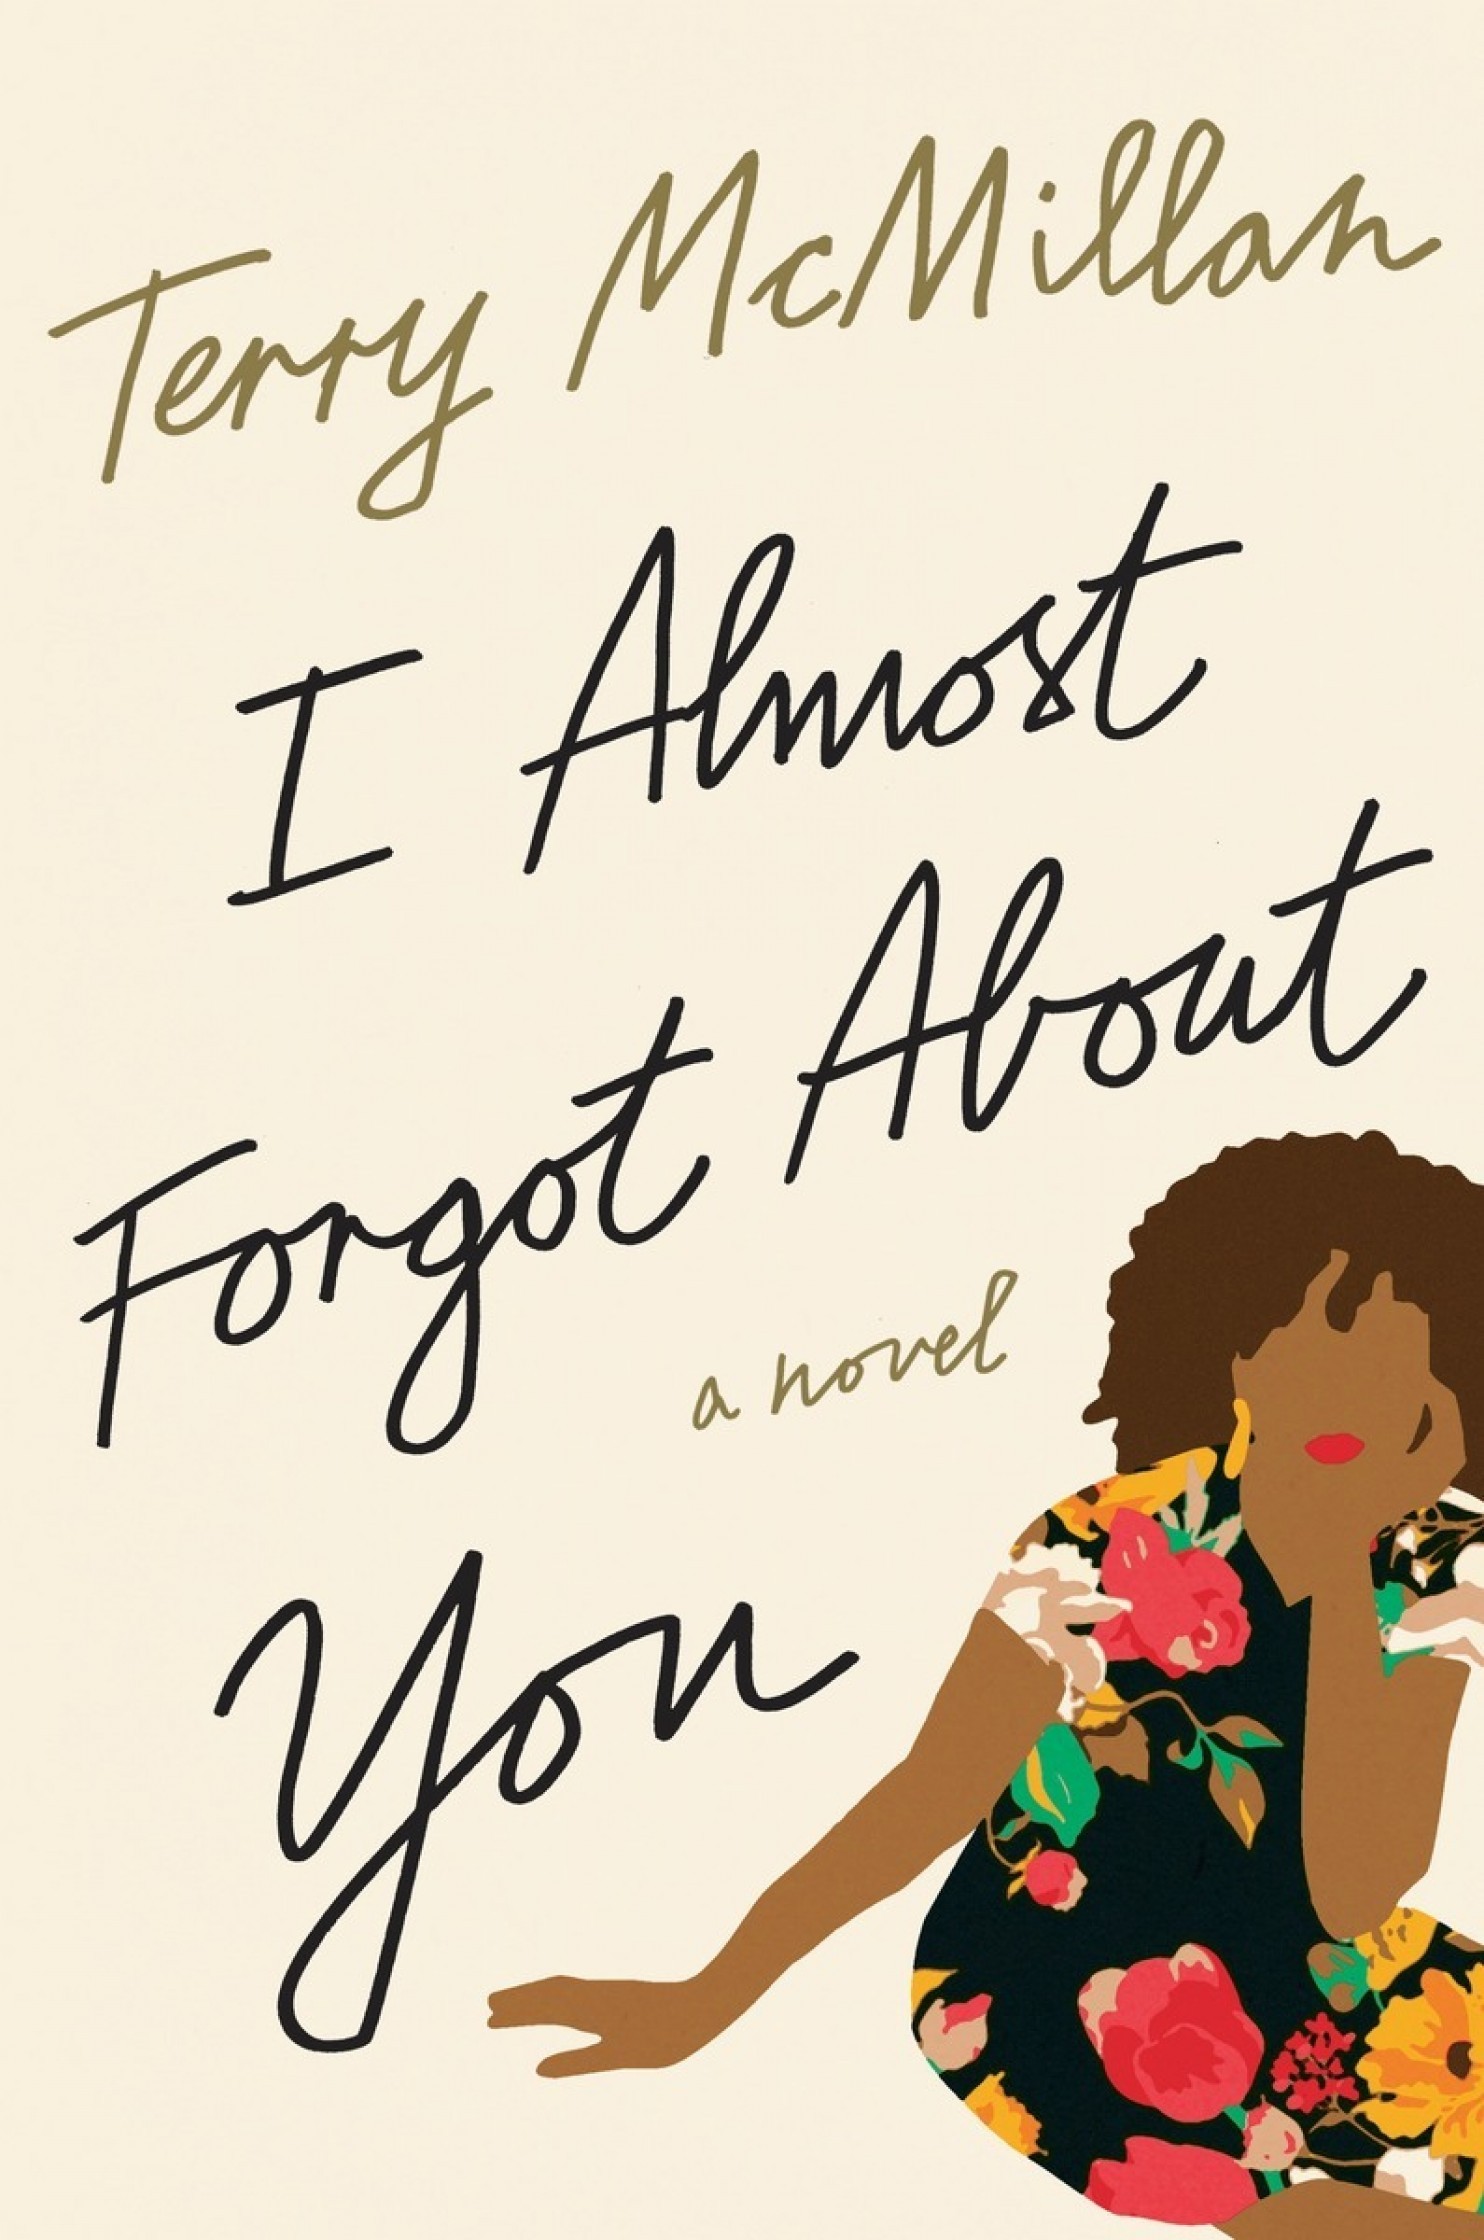 Book Review: “I Almost Forgot About You” by Terry McMillan